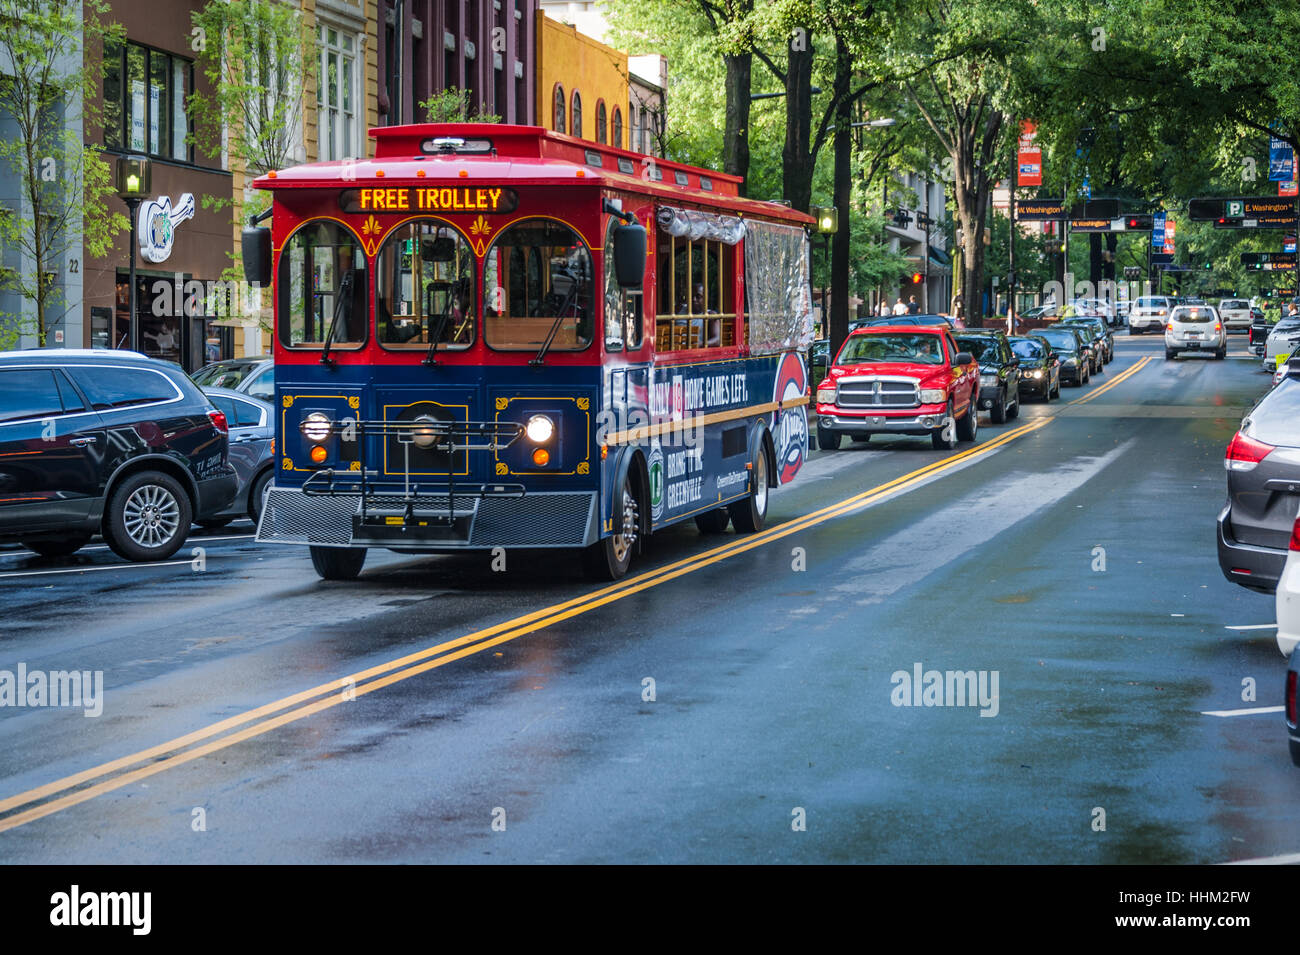 Free trolley transportation on beautiful tree-lined Main Street in historic downtown Greenville, South Carolina, USA. Stock Photo